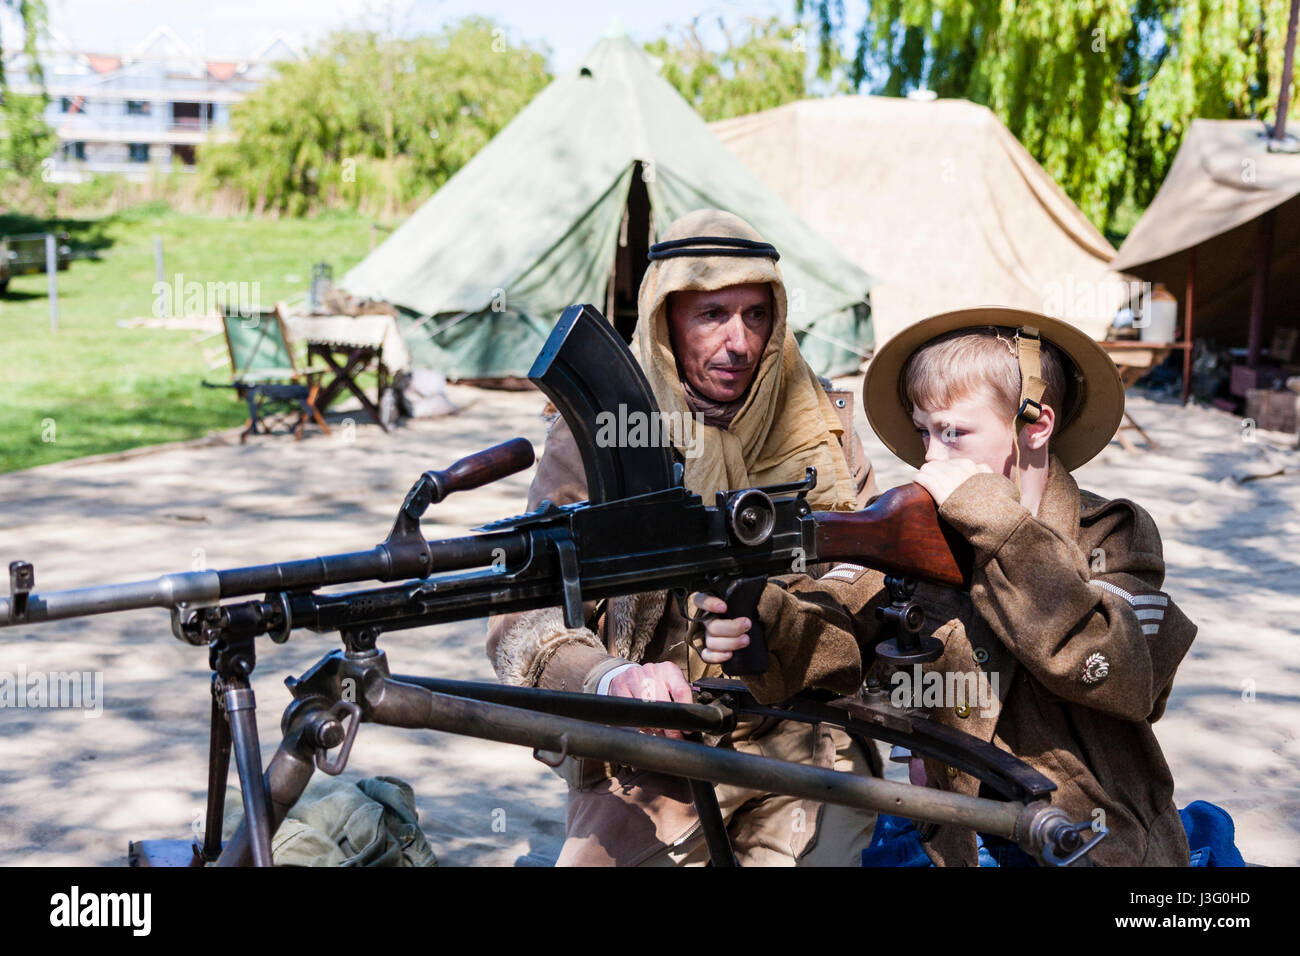 Salute to the 40s re-enactment. Child, blonde boy, 6-7 years old, in British army uniform, being shown how to fire Bren gun by Desert Rat soldier. Stock Photo